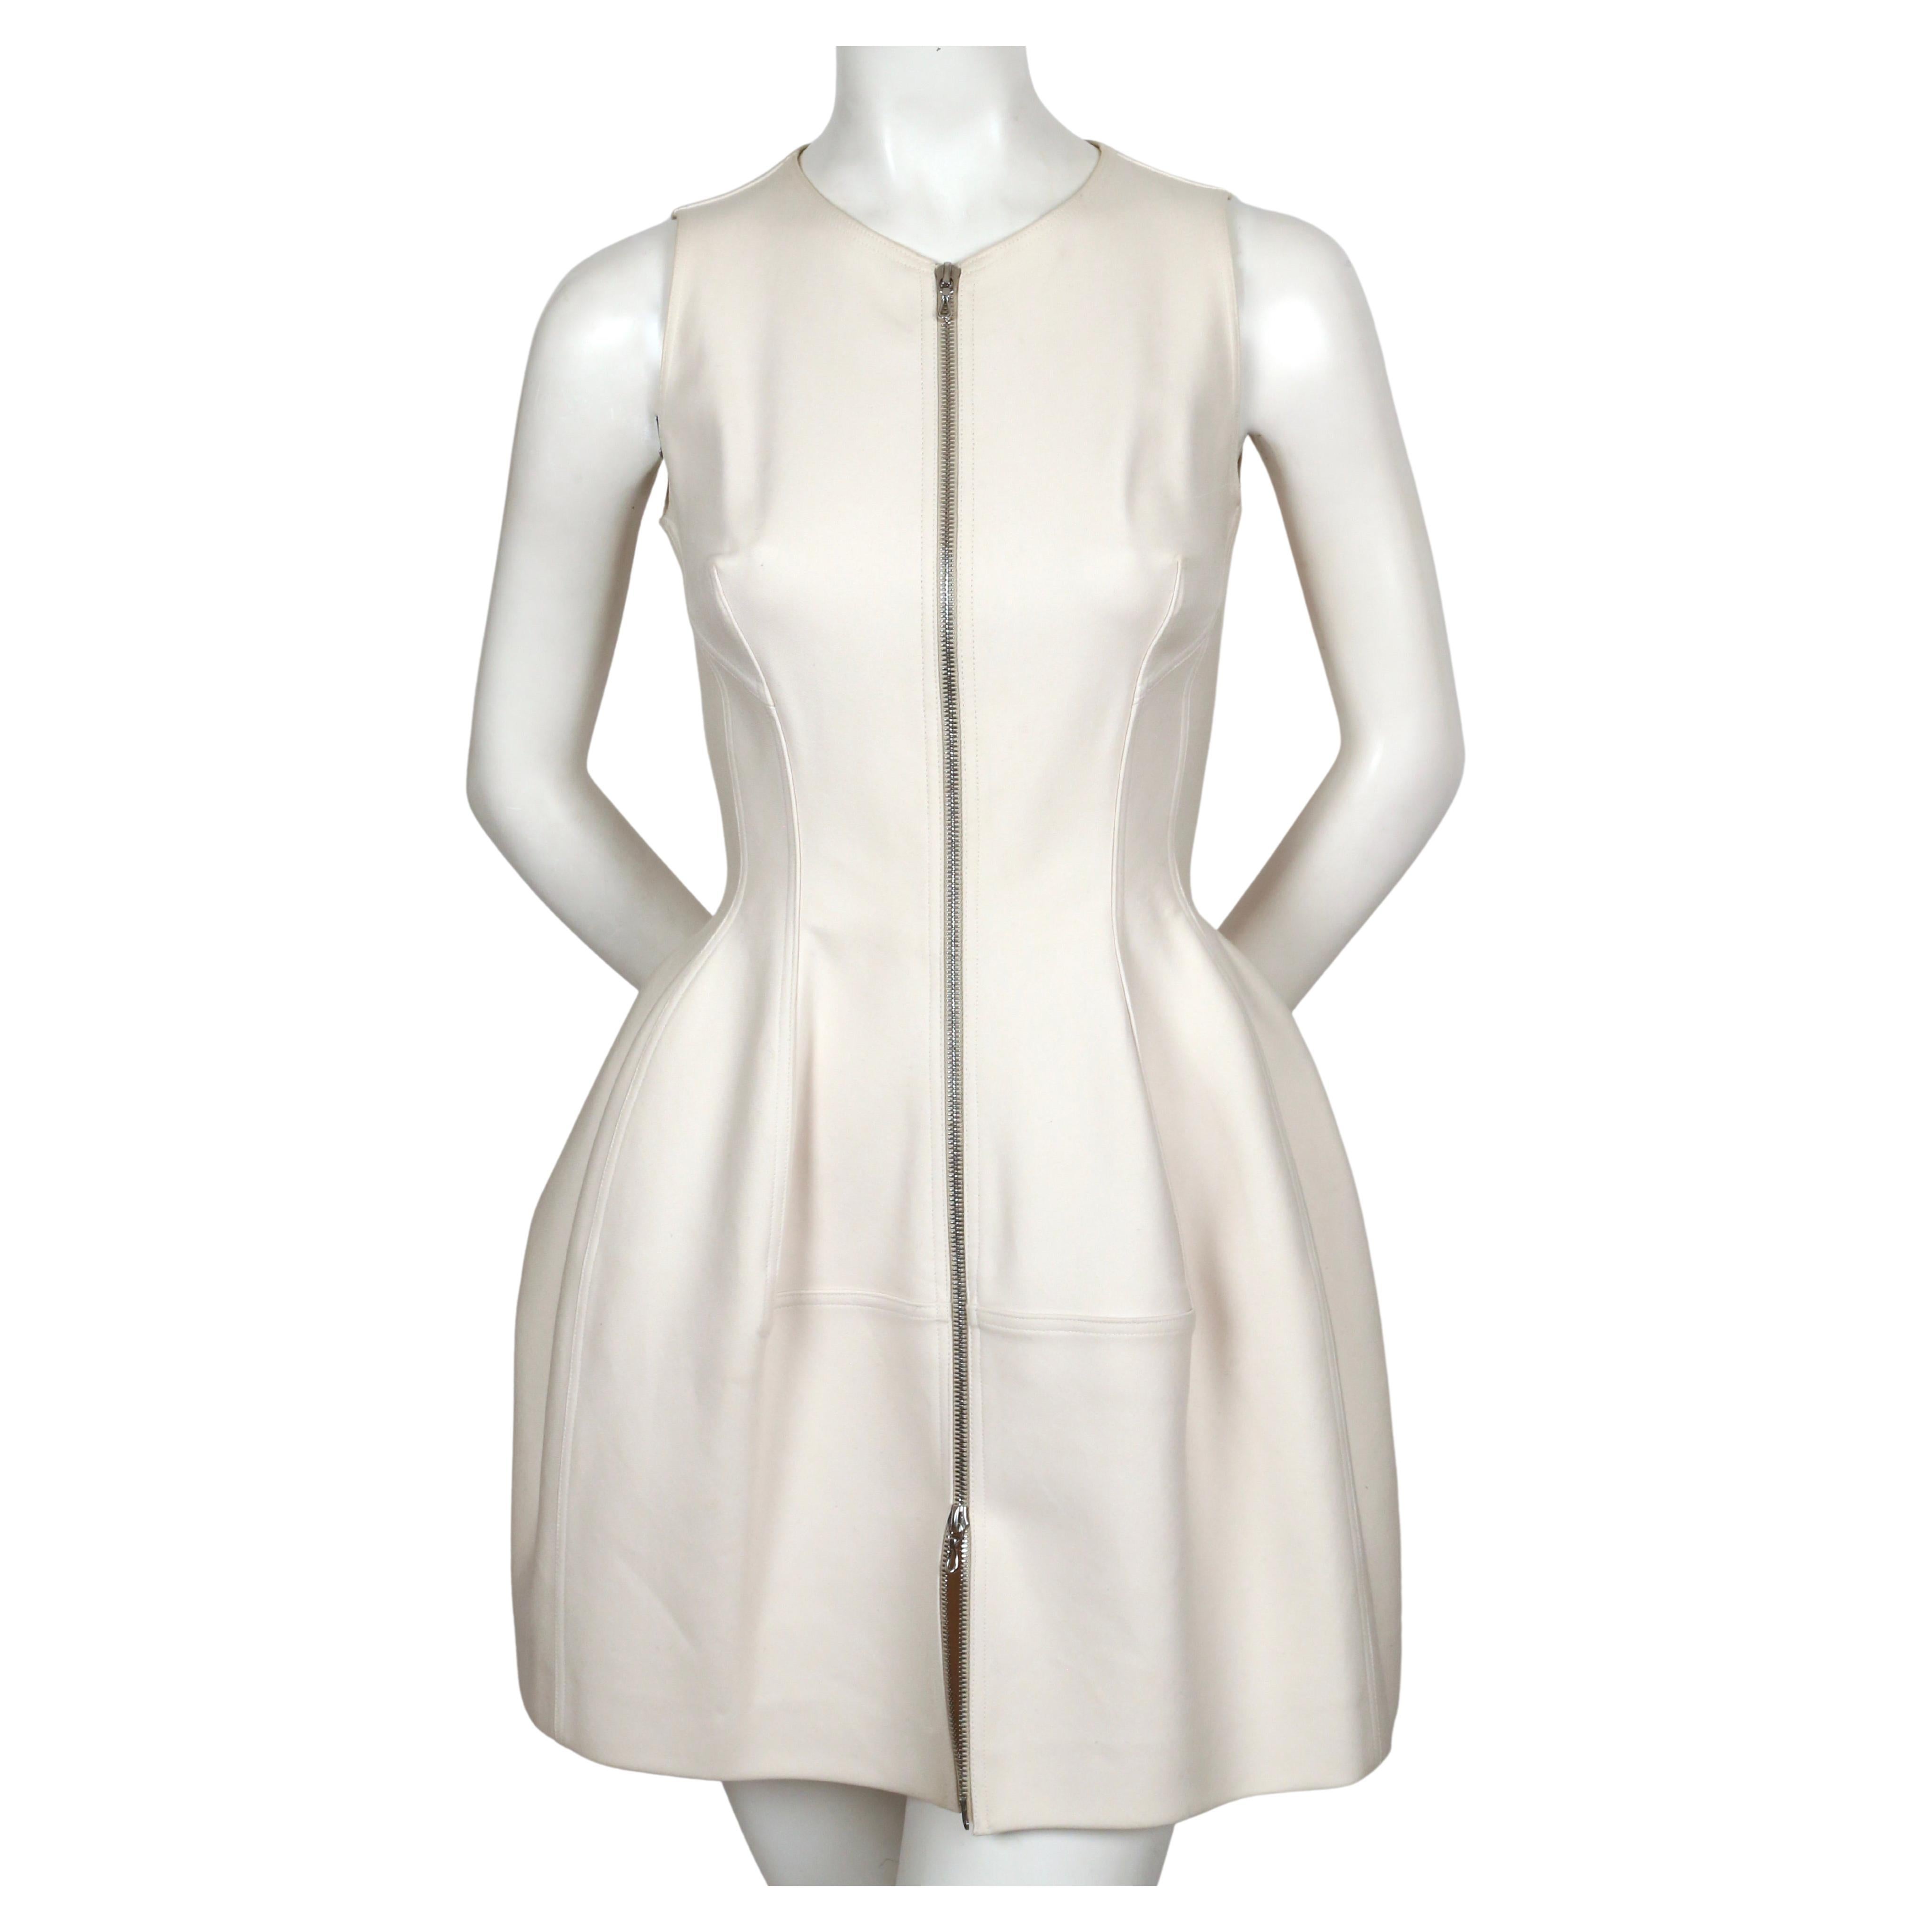 Gorgeous, cream, tulip shaped dress with silver toned two-way zipper from Azzedine Alaia. No size is indicated however it best fits a size 4 or slim 6 (33